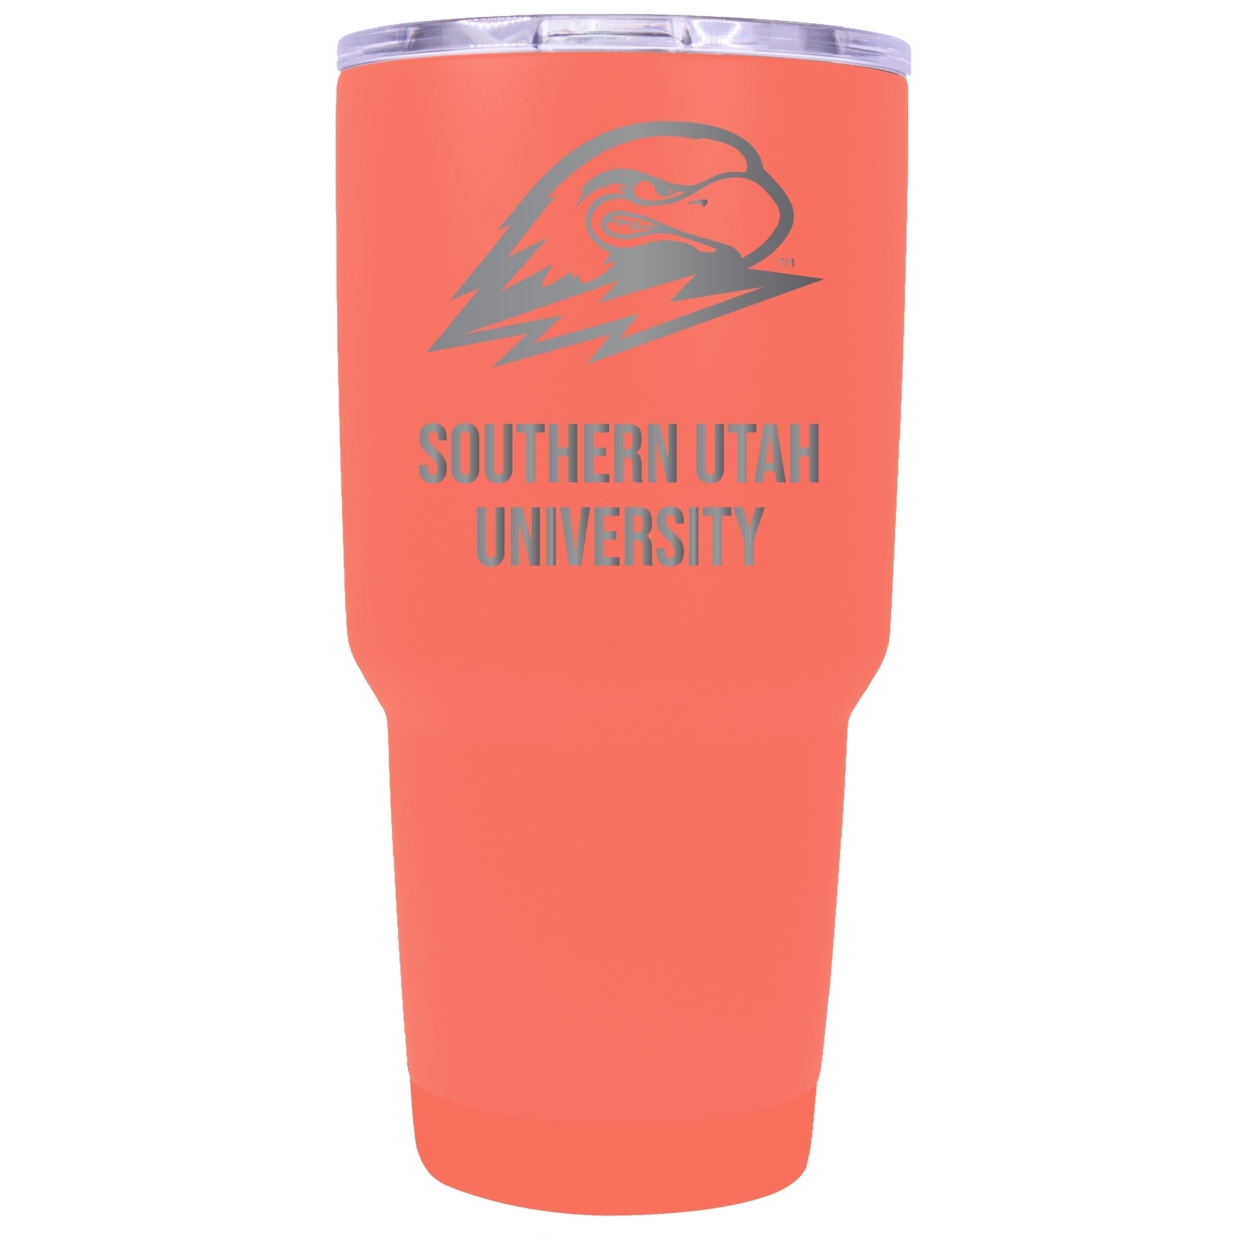 Southern Utah University 24 Oz Laser Engraved Stainless Steel Insulated Tumbler - Choose Your Color. - Coral